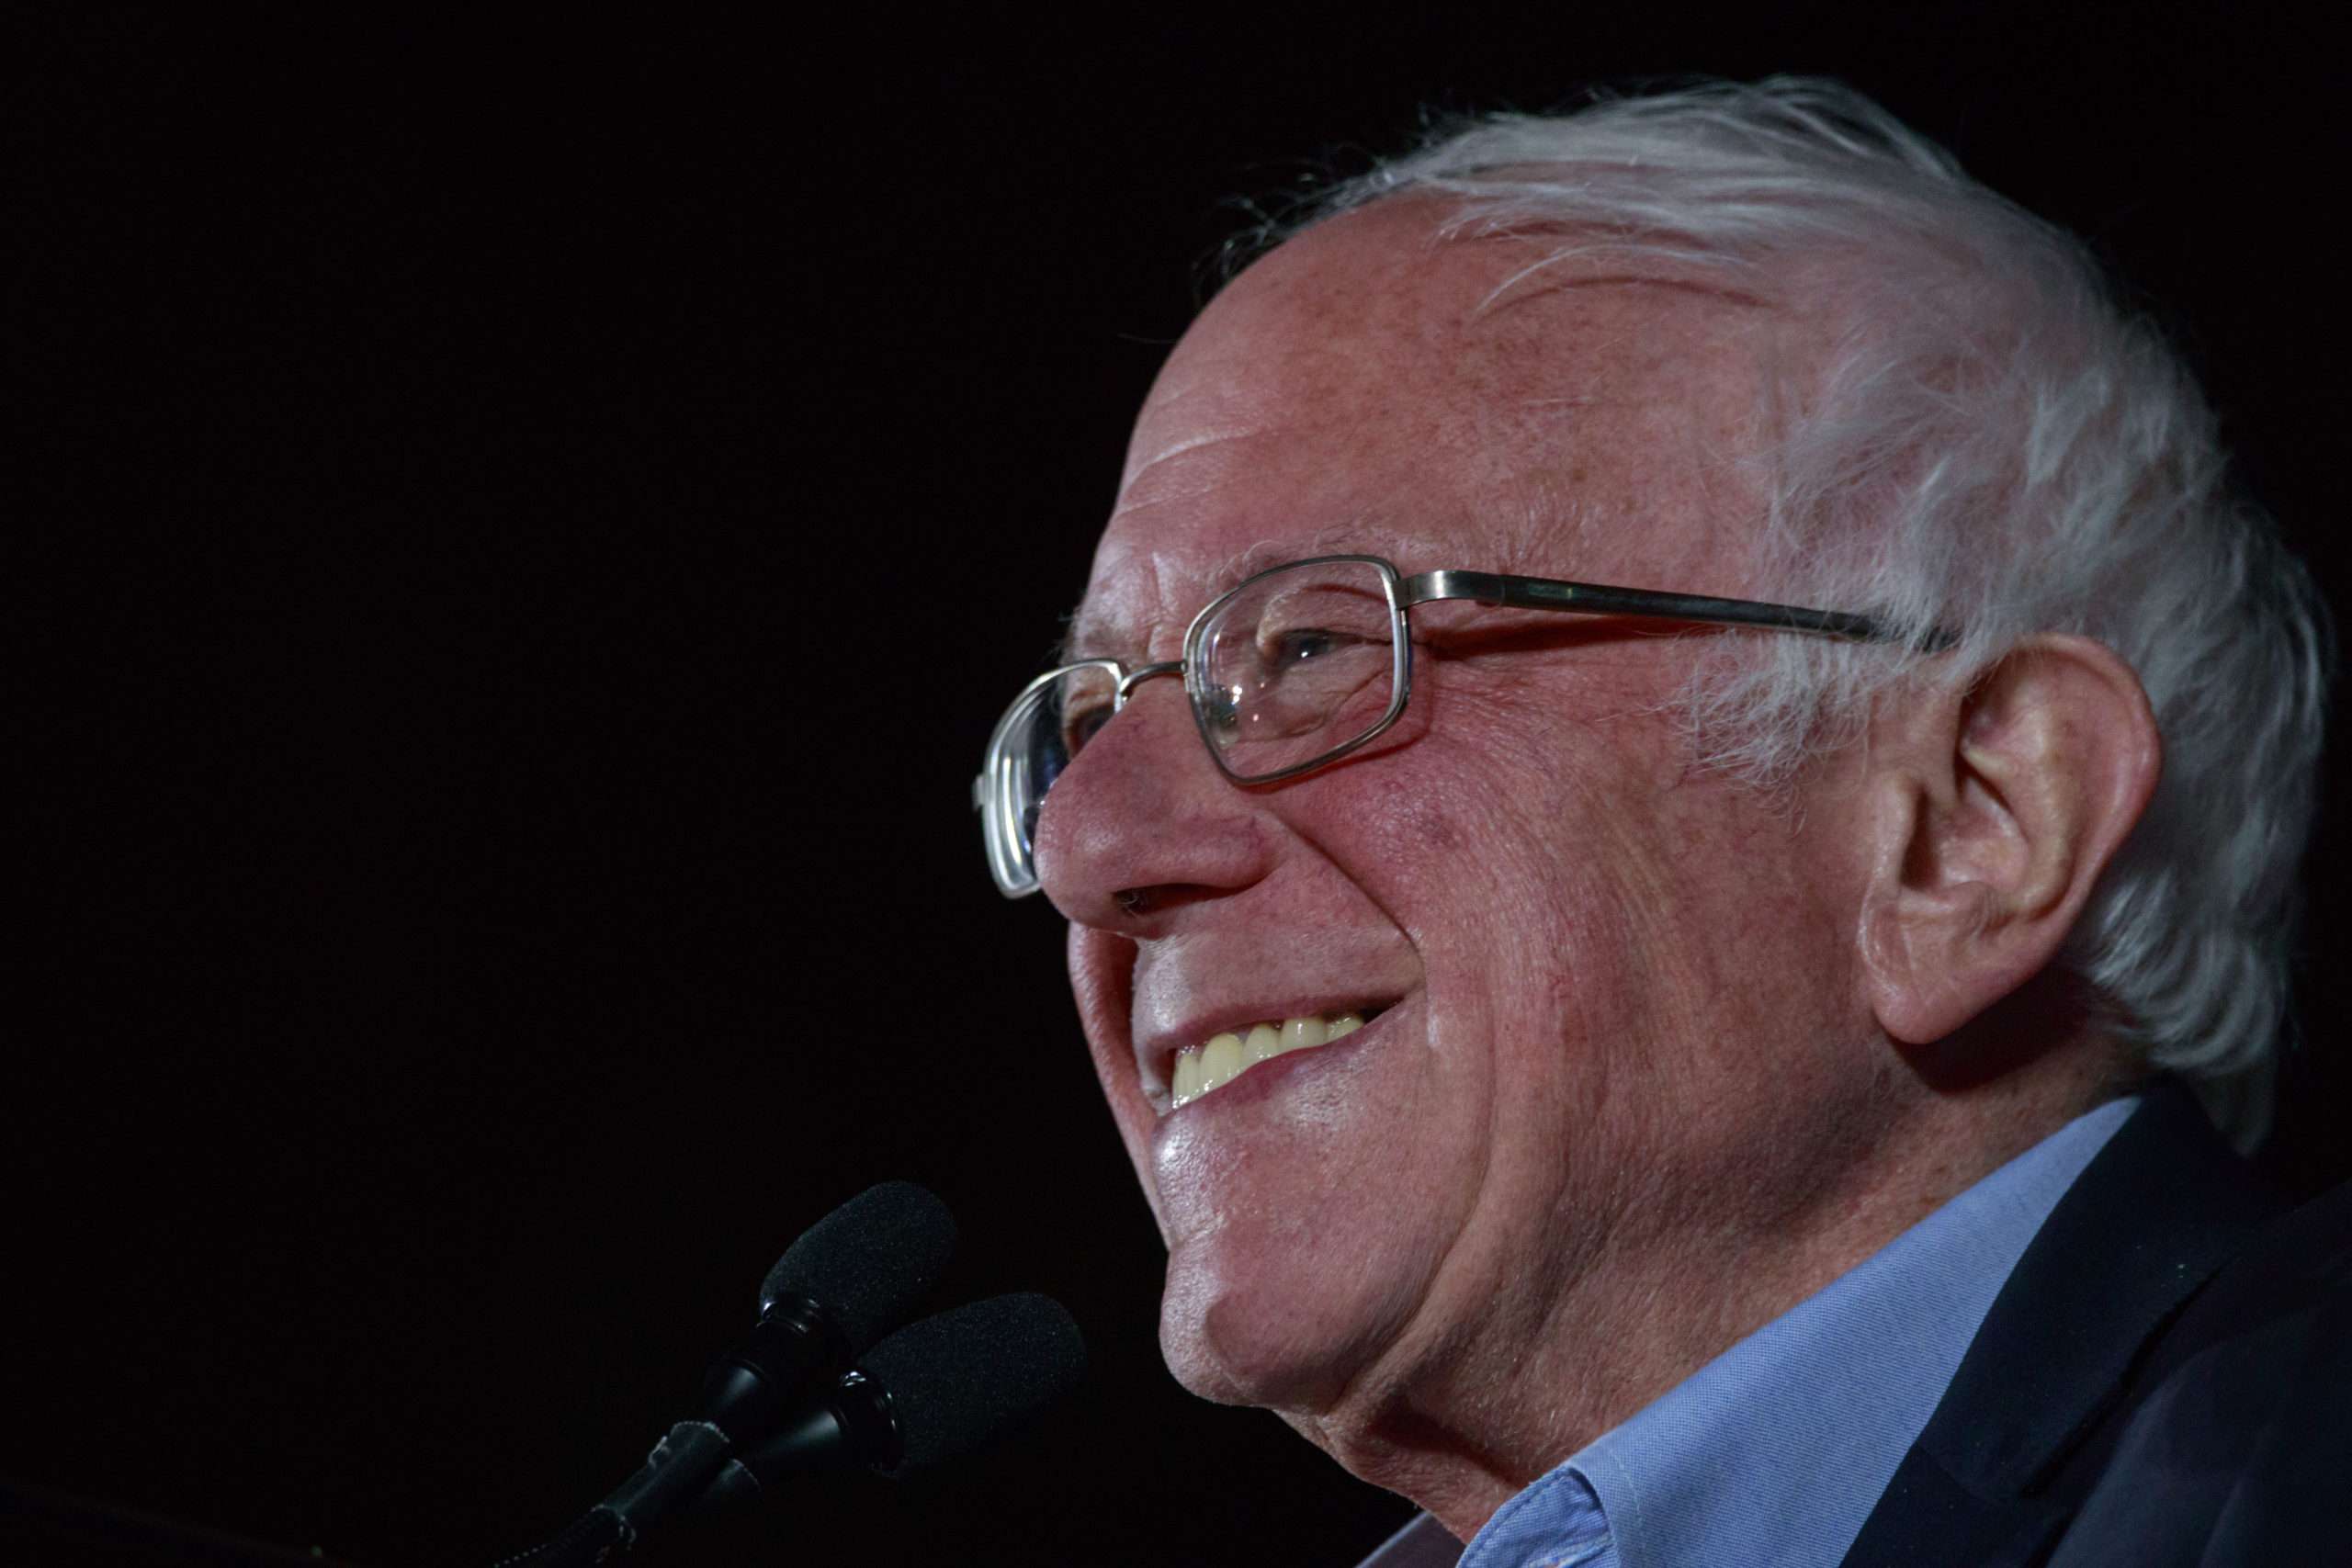 Bernie Sanders Wins The Nevada Caucus Hes On Track To Win The Democratic Presidential Nomination 